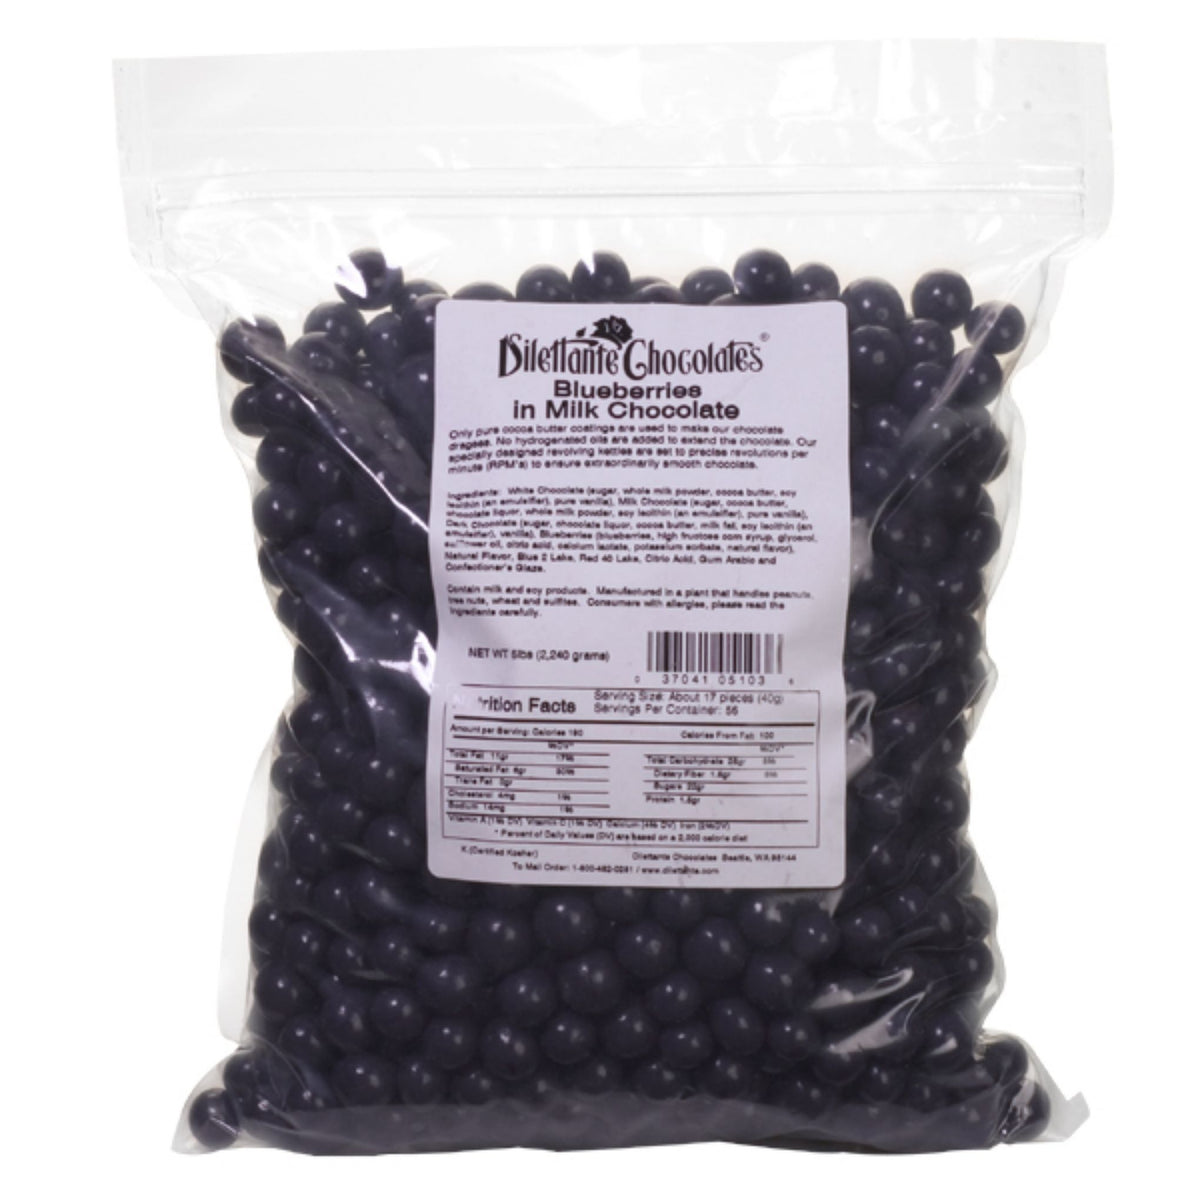 Dilettante Chocolates Chocolate-Covered Blueberries in Milk Chocolate Inside of a Bulk 5-Pound Bag